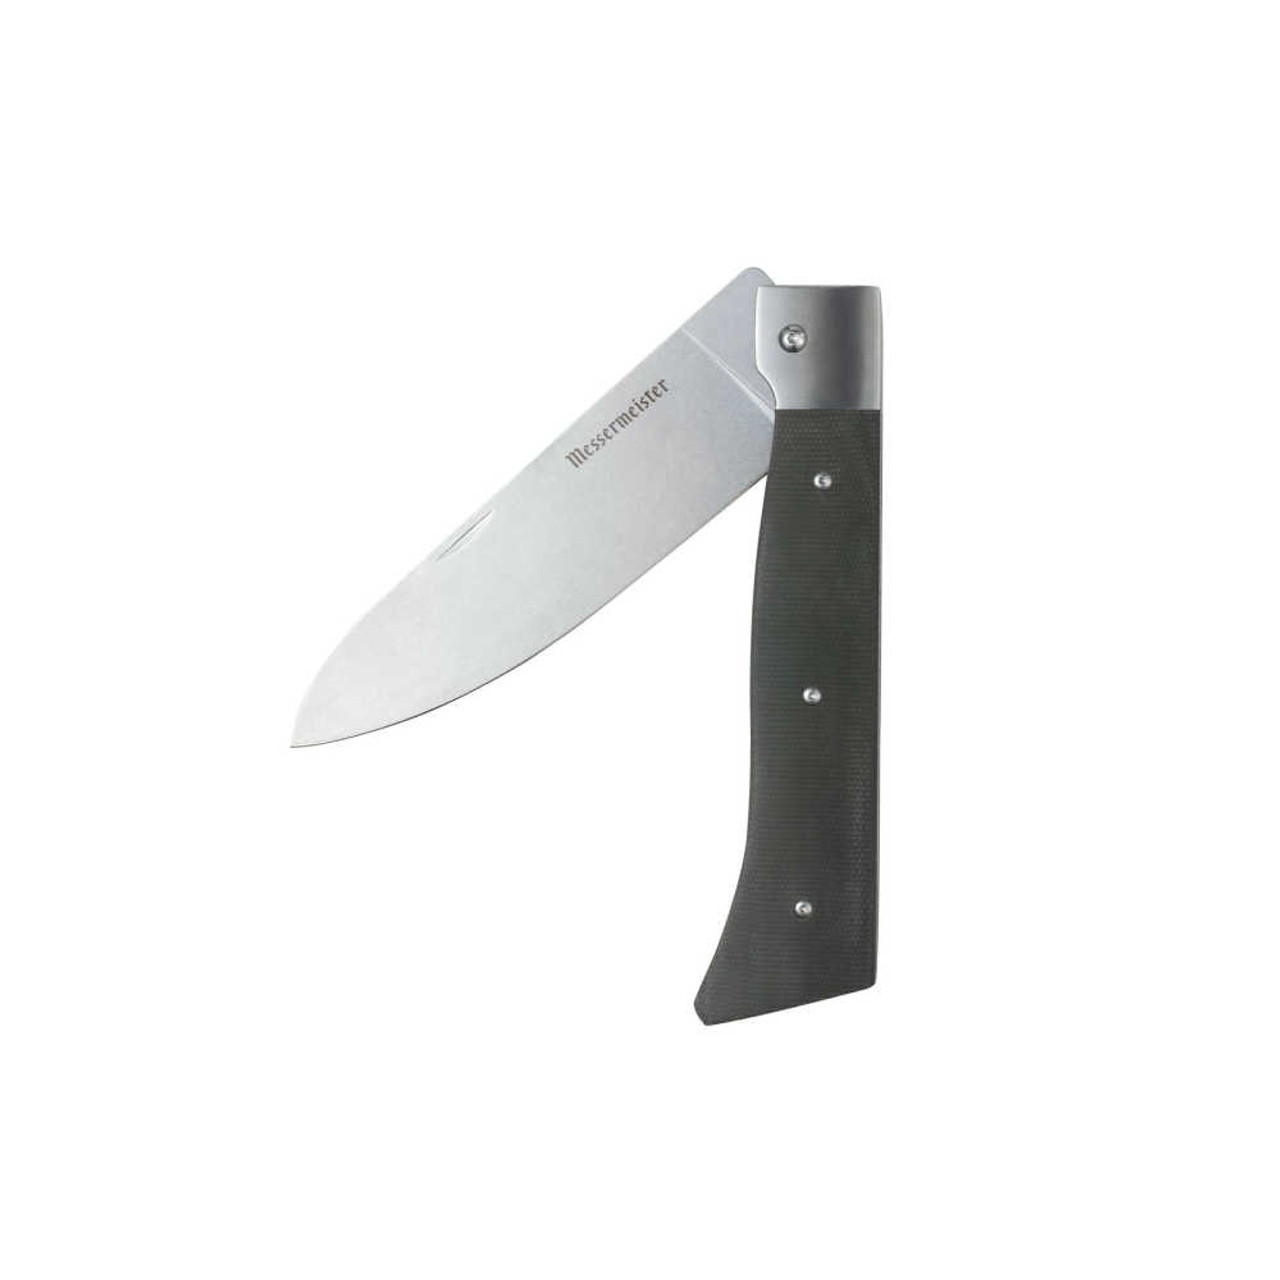 https://cdn11.bigcommerce.com/s-hccytny0od/images/stencil/1280x1280/products/4373/17107/Adventure_Chef_Folding_Chefs_Knife_Linen_3__81774.1635528109.jpg?c=2?imbypass=on